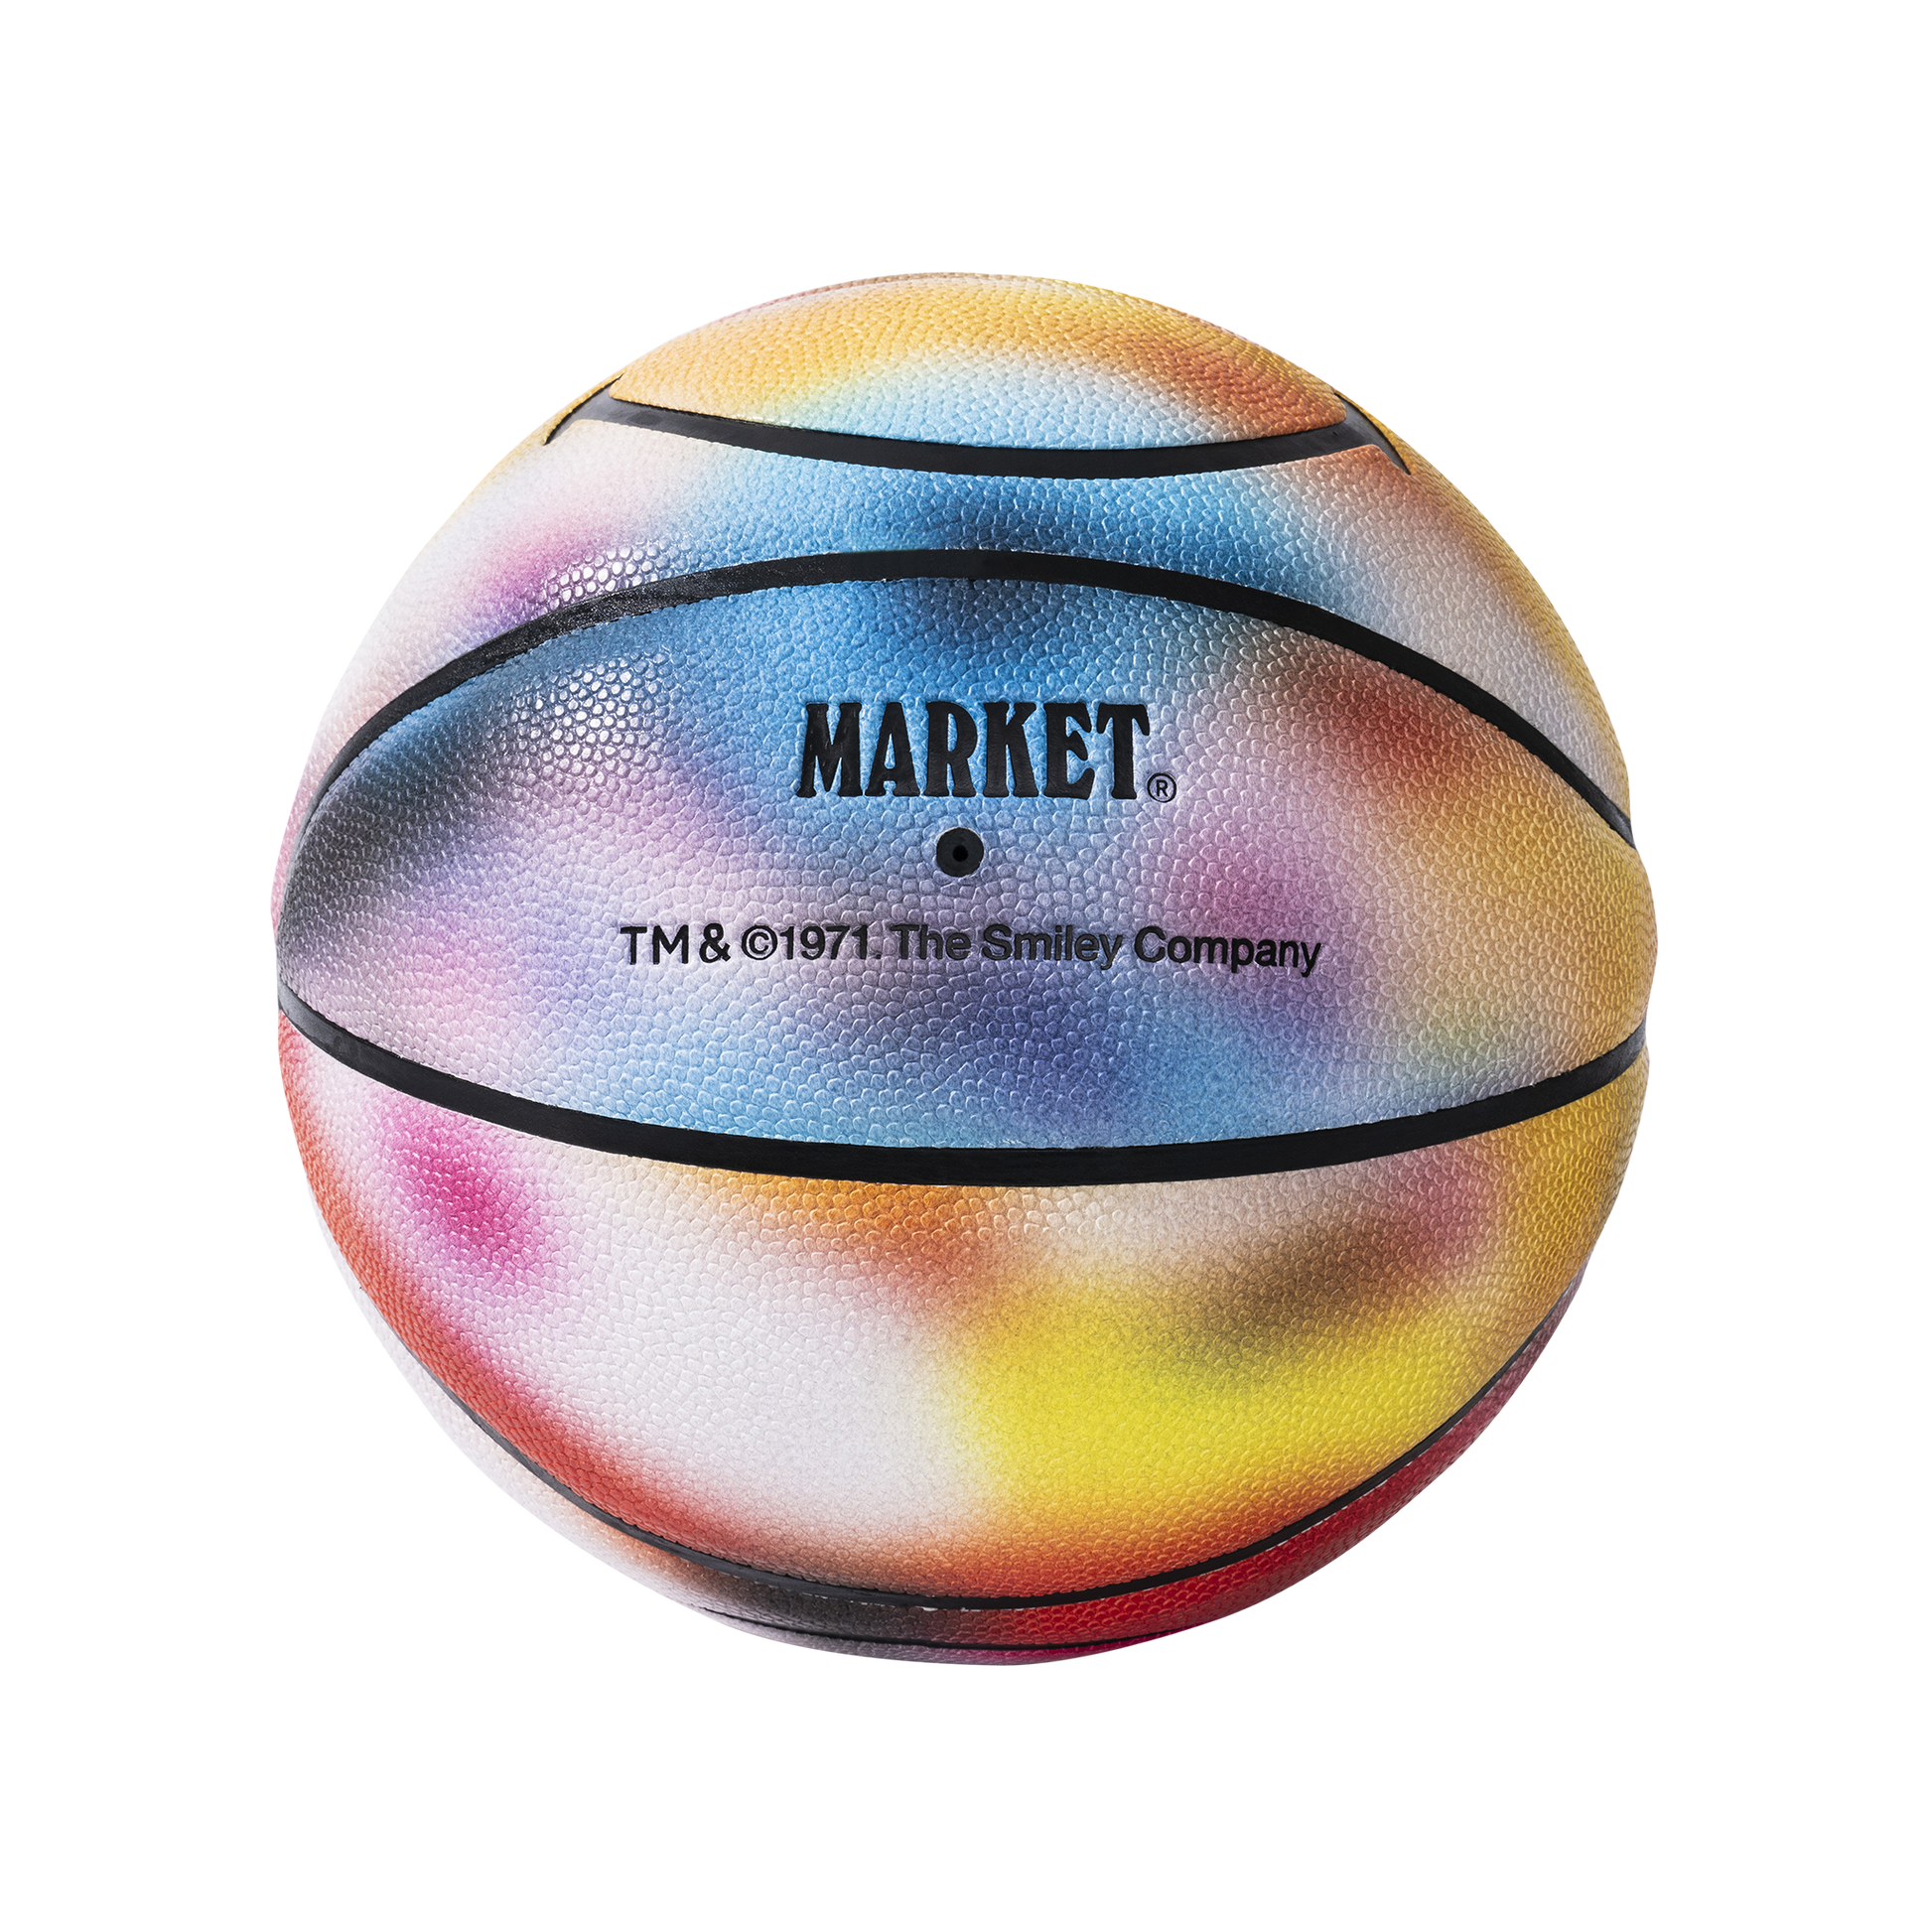 MARKET clothing brand SMILEY NEAR SIGHTED BASKETBALL. Find more basketballs, sporting goods, homegoods and graphic tees at MarketStudios.com. Formally Chinatown Market. 